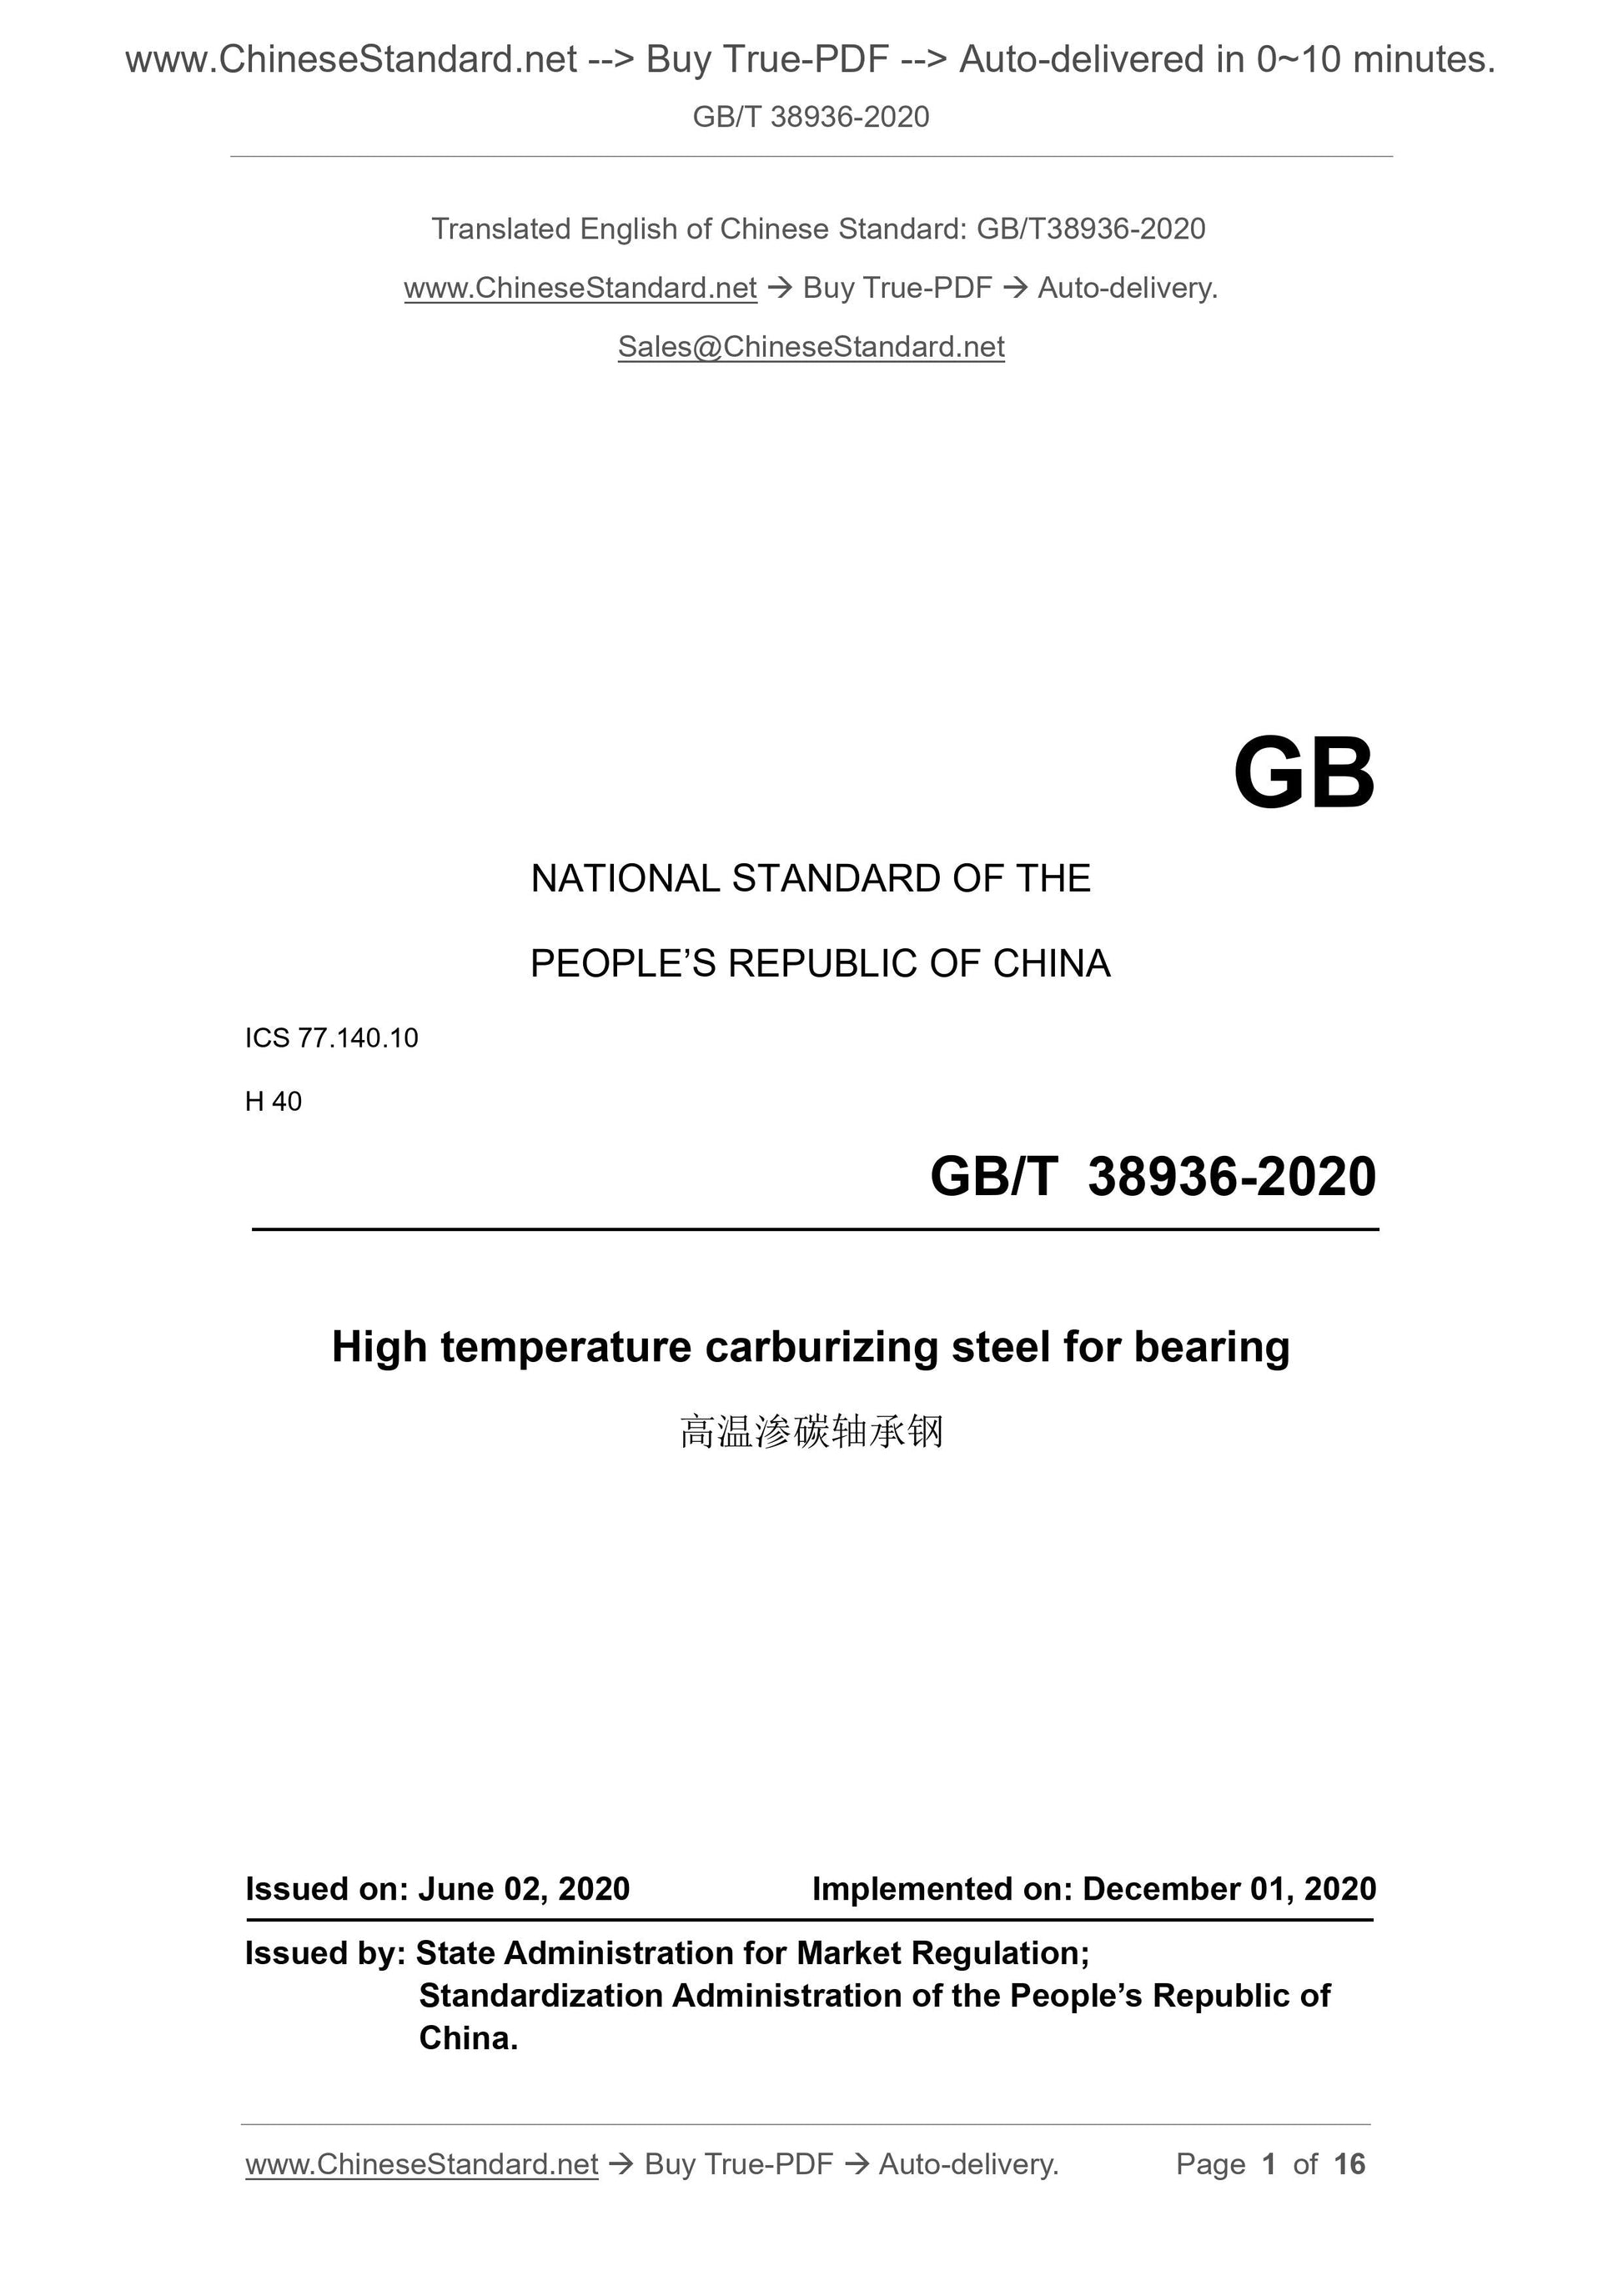 GB/T 38936-2020 Page 1